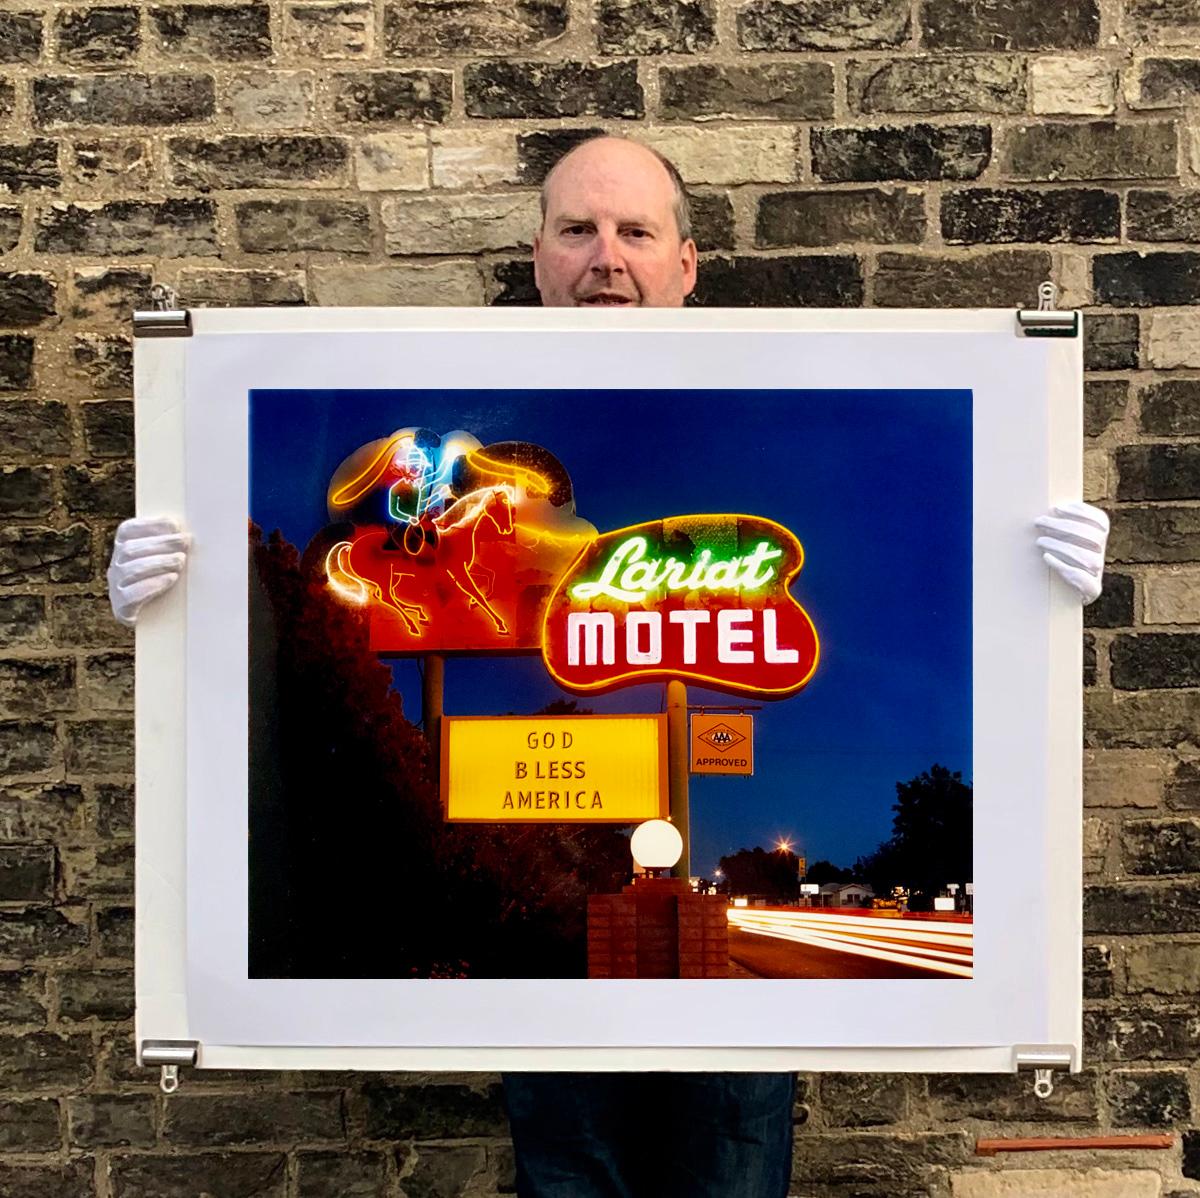 This piece is classic roadside Americana 'Sign Porn' photography and Richard Heeps captured it in its original site. The owners since sold the Lariat Motel and donated the 1950's sign with original neon tubing to the Churchill Arts Council.
This